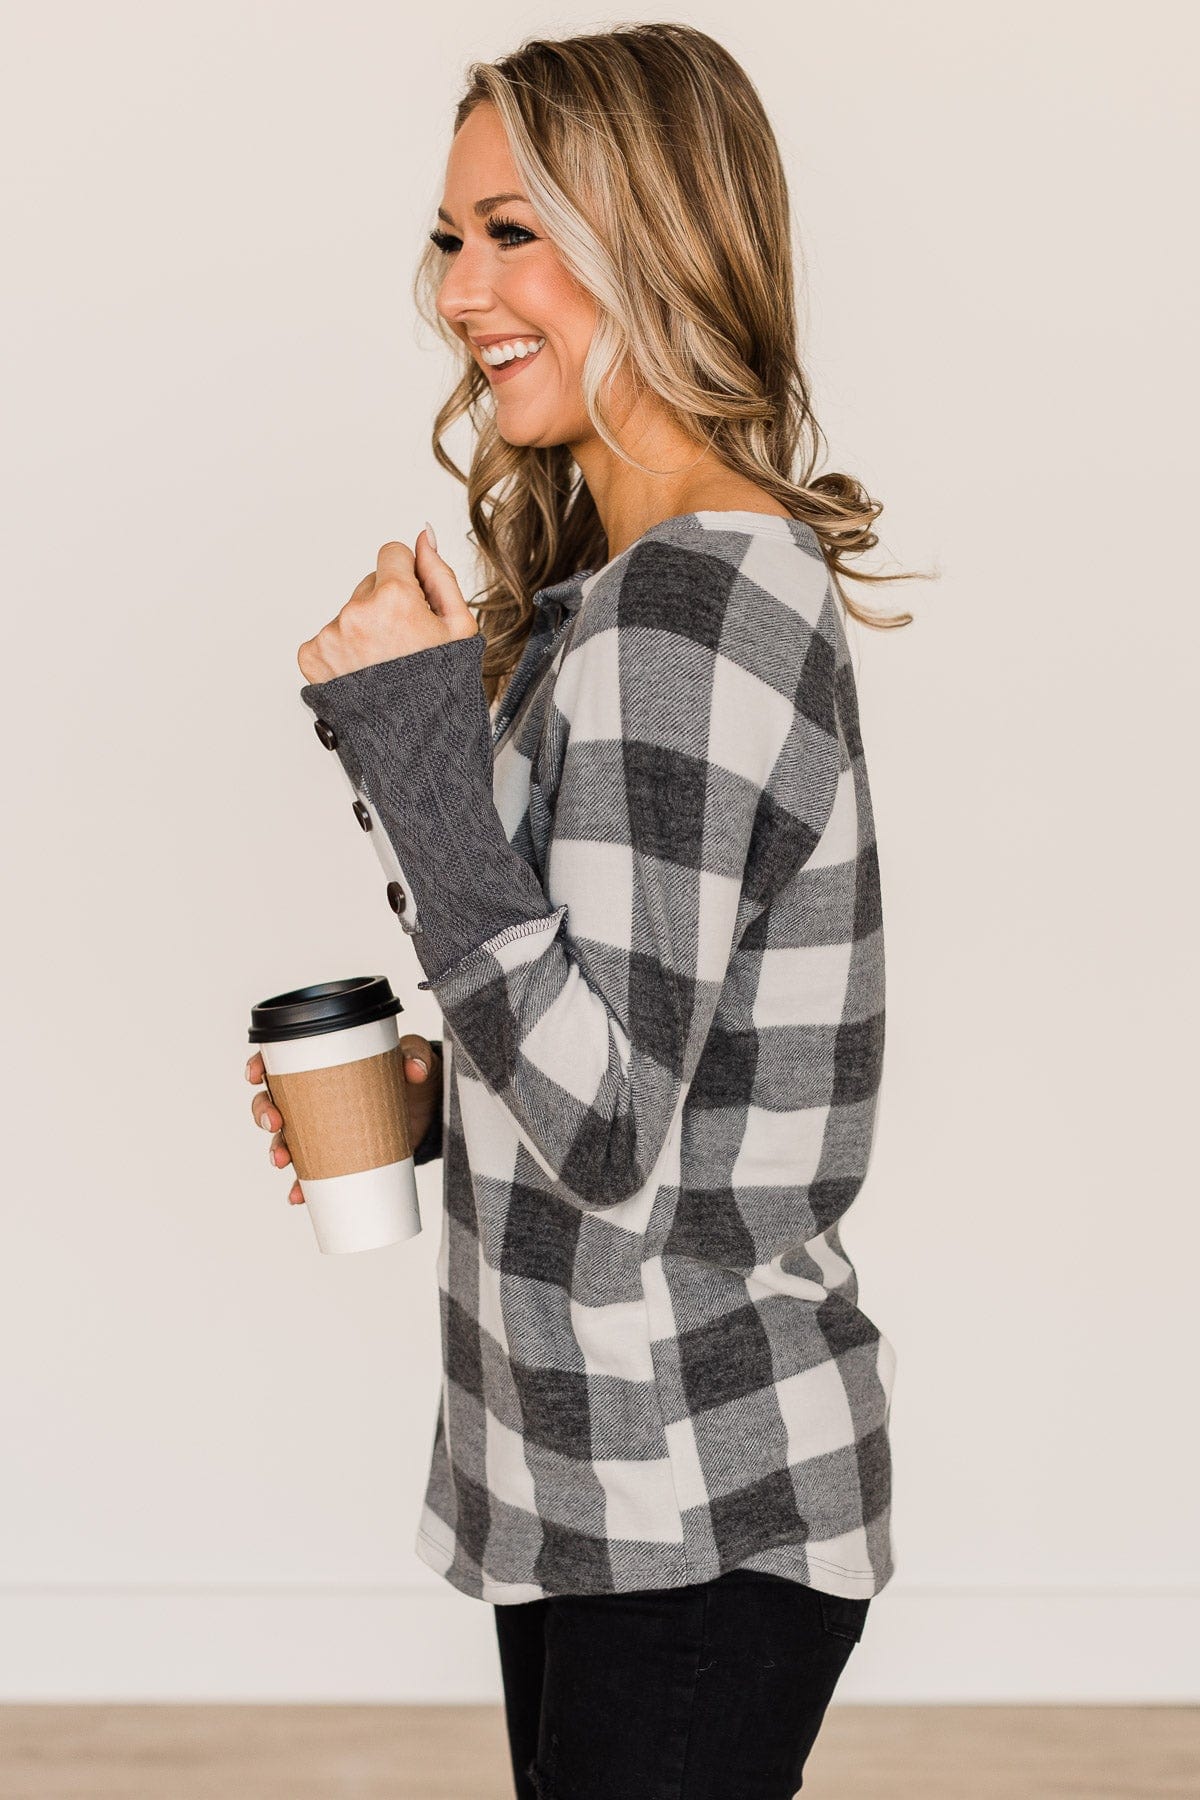 By The Fireside Plaid Knit Top- Off-White & Charcoal